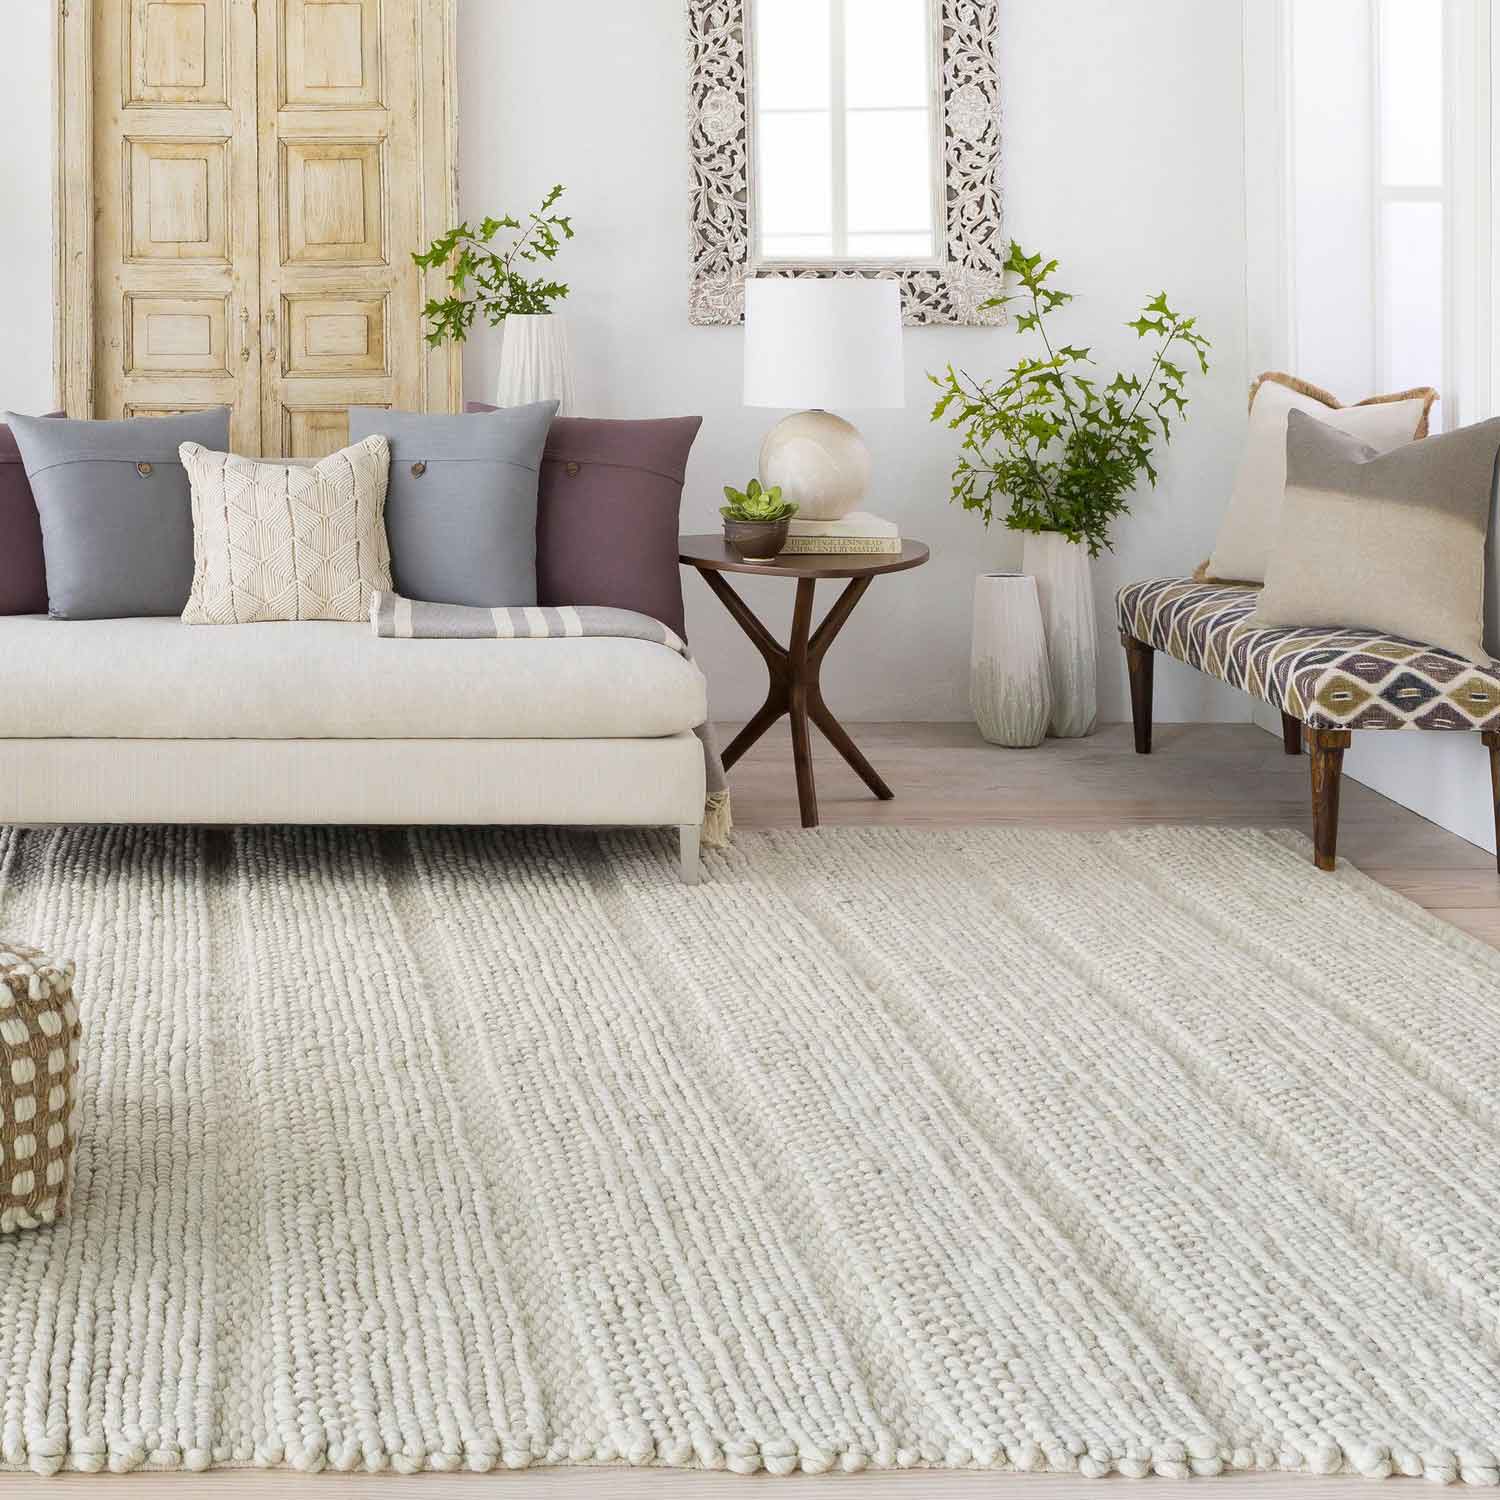 Uttermost Clifton Hand Woven 10 X 14 Rug - Ivory